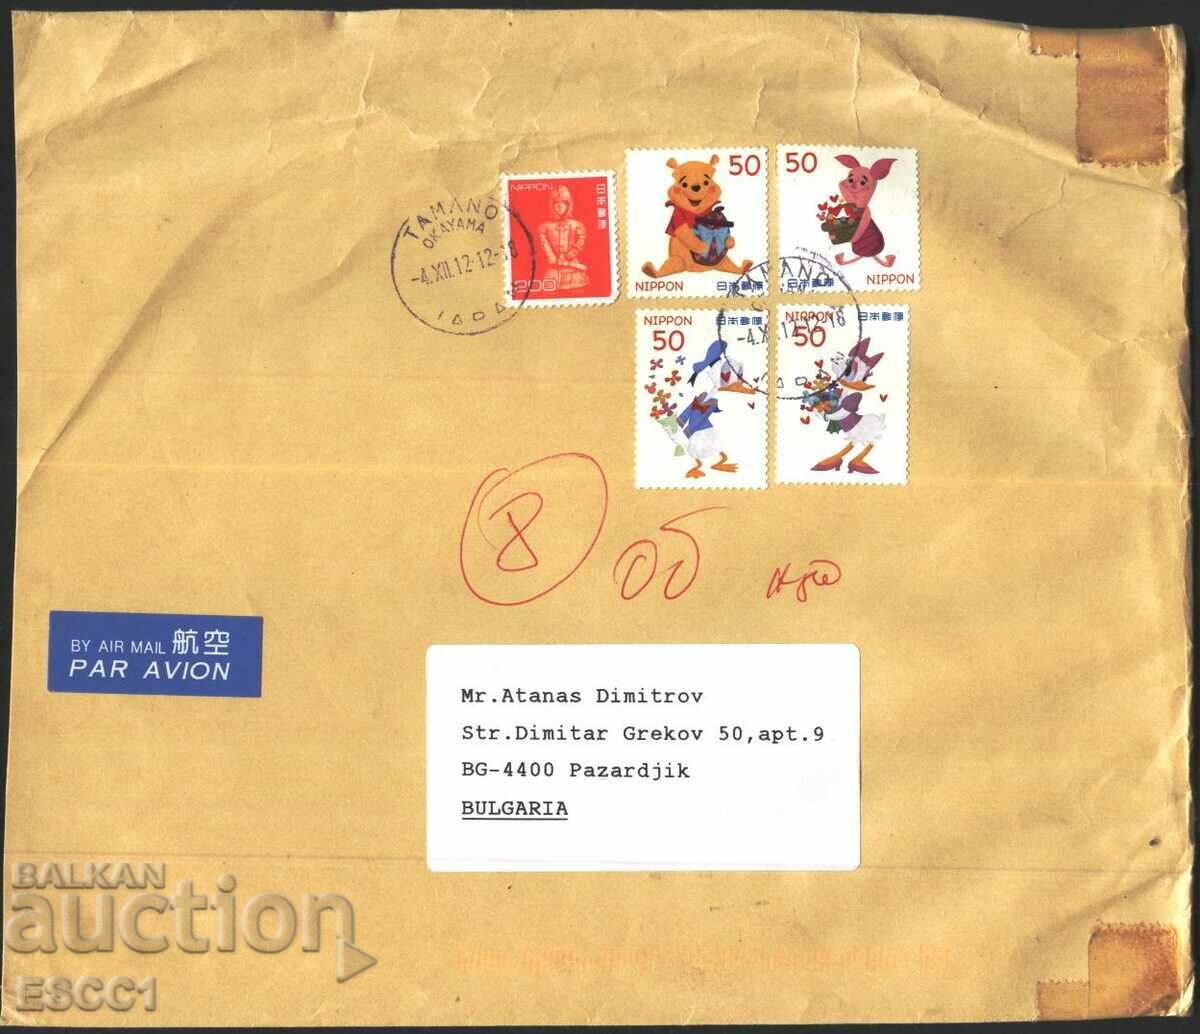 Traveled envelope with Disney Animation 2012 stamps from Japan